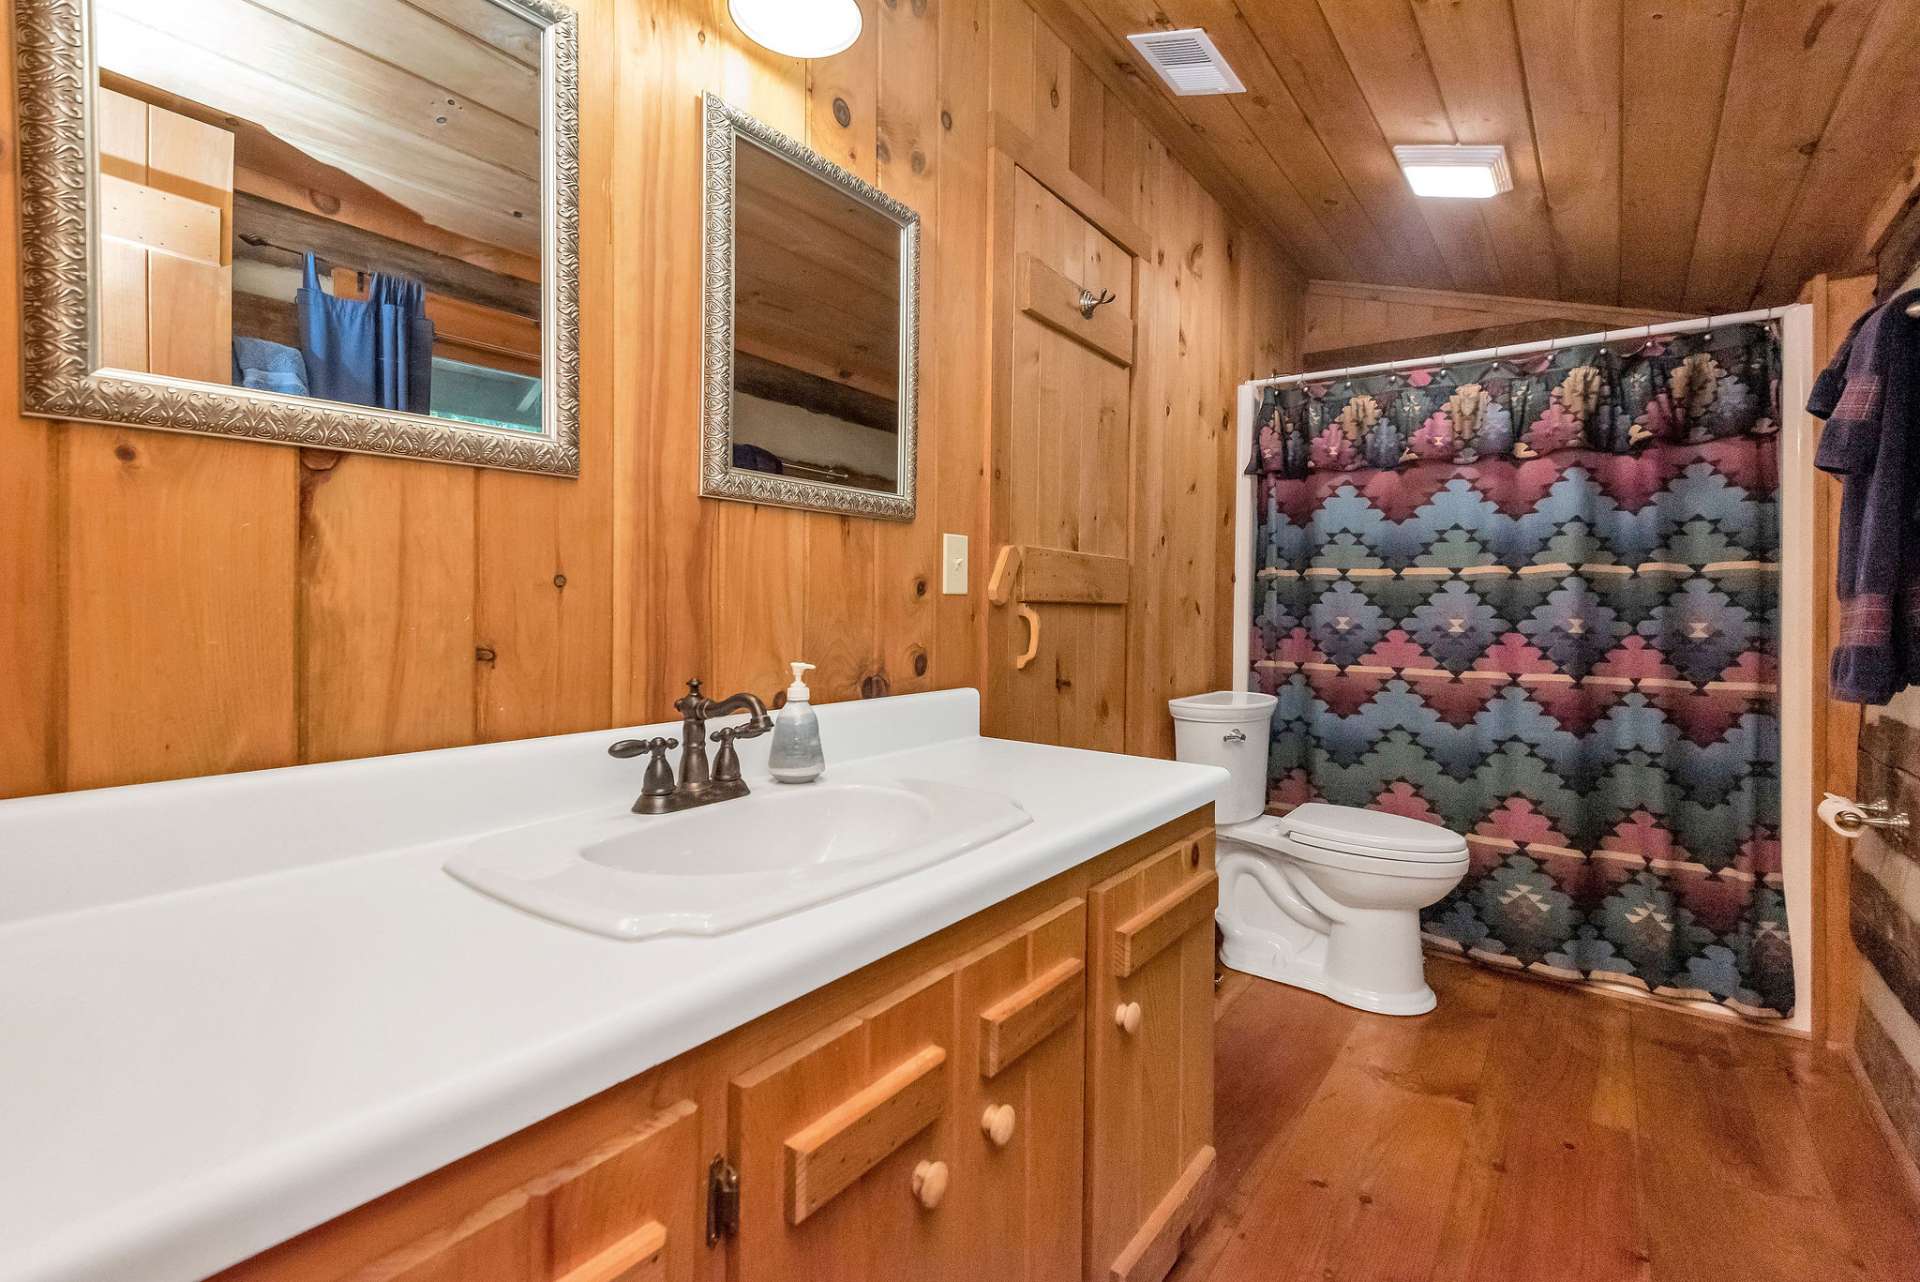 Full bath in loft is a terrific feature of this home.